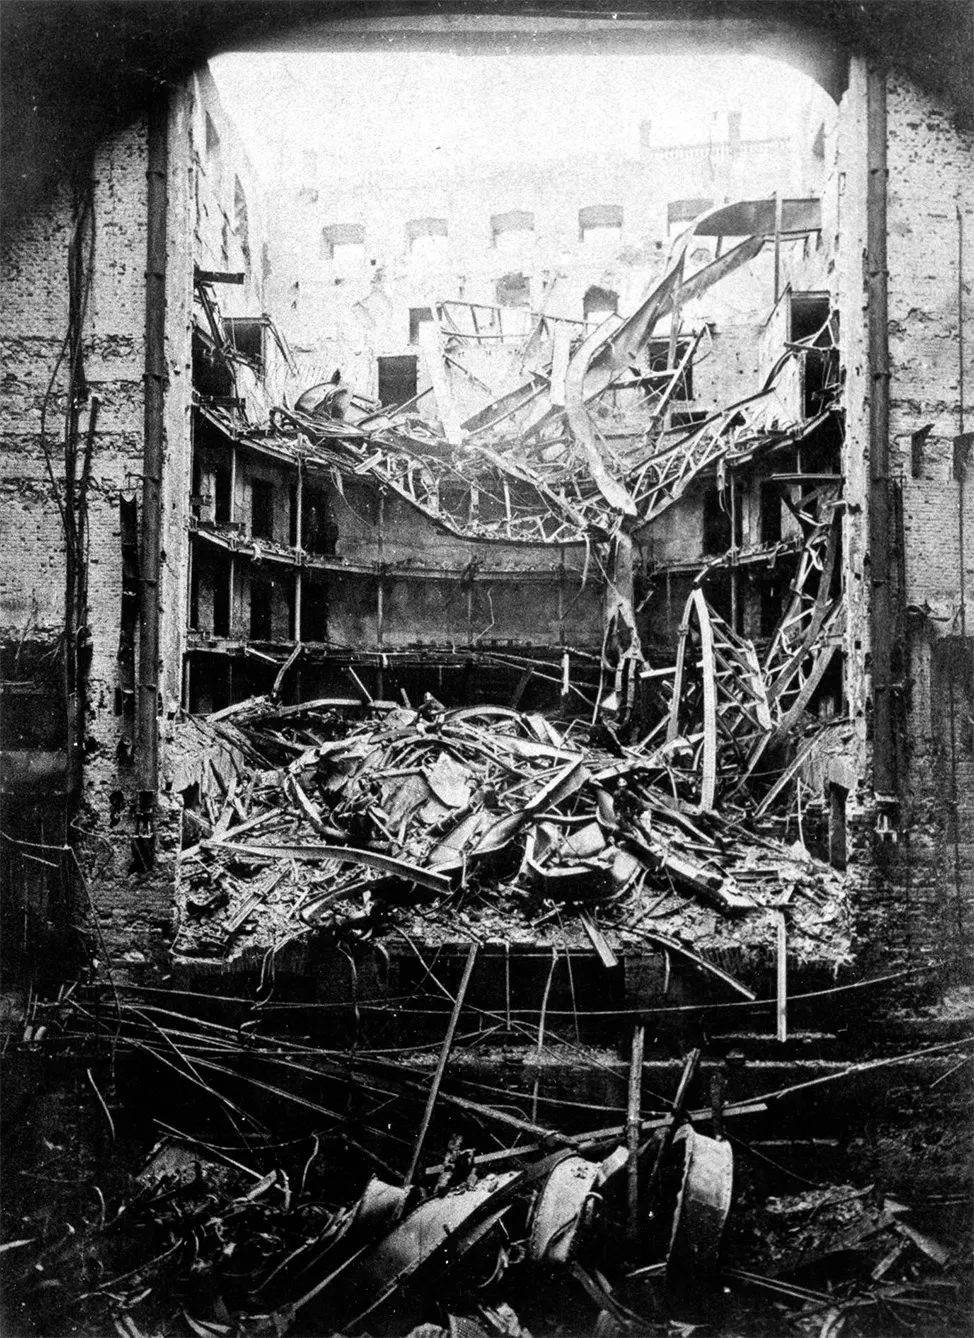 A view of the interior of the National Theater after the fire in 1881